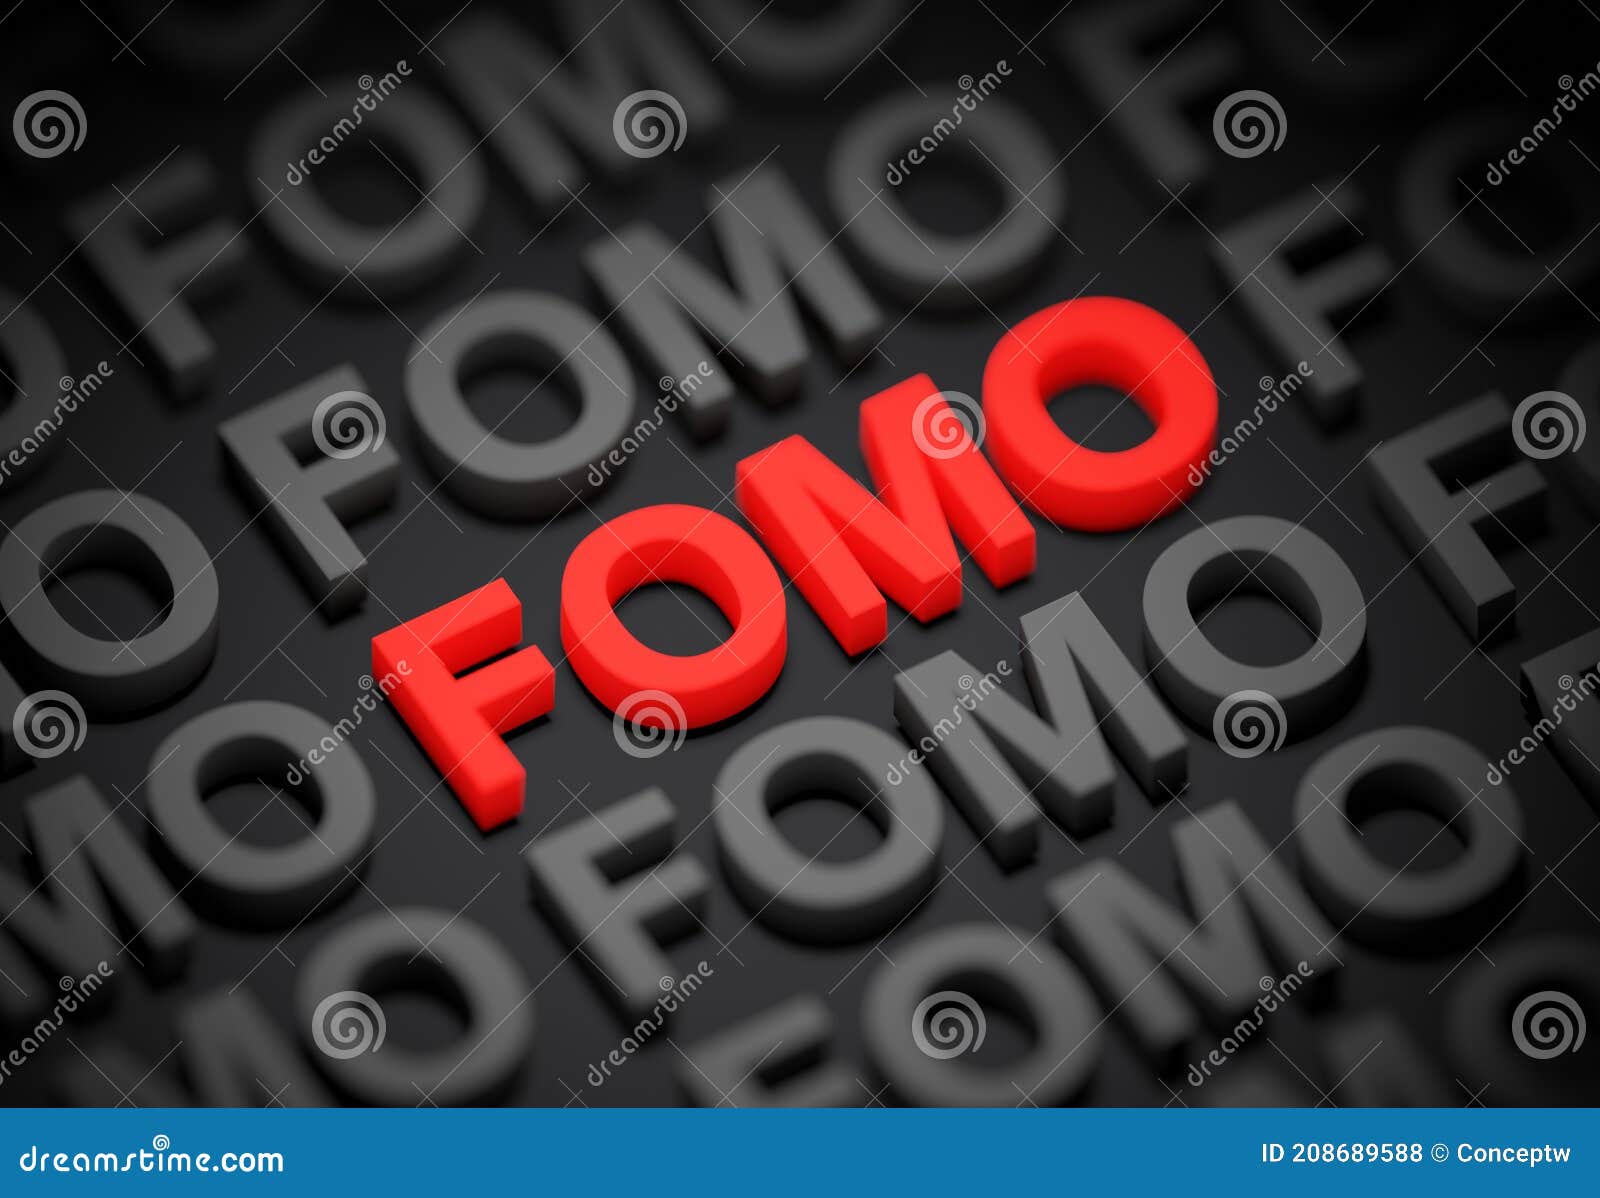 fomo - fear of missing out conceptual tagcloud background